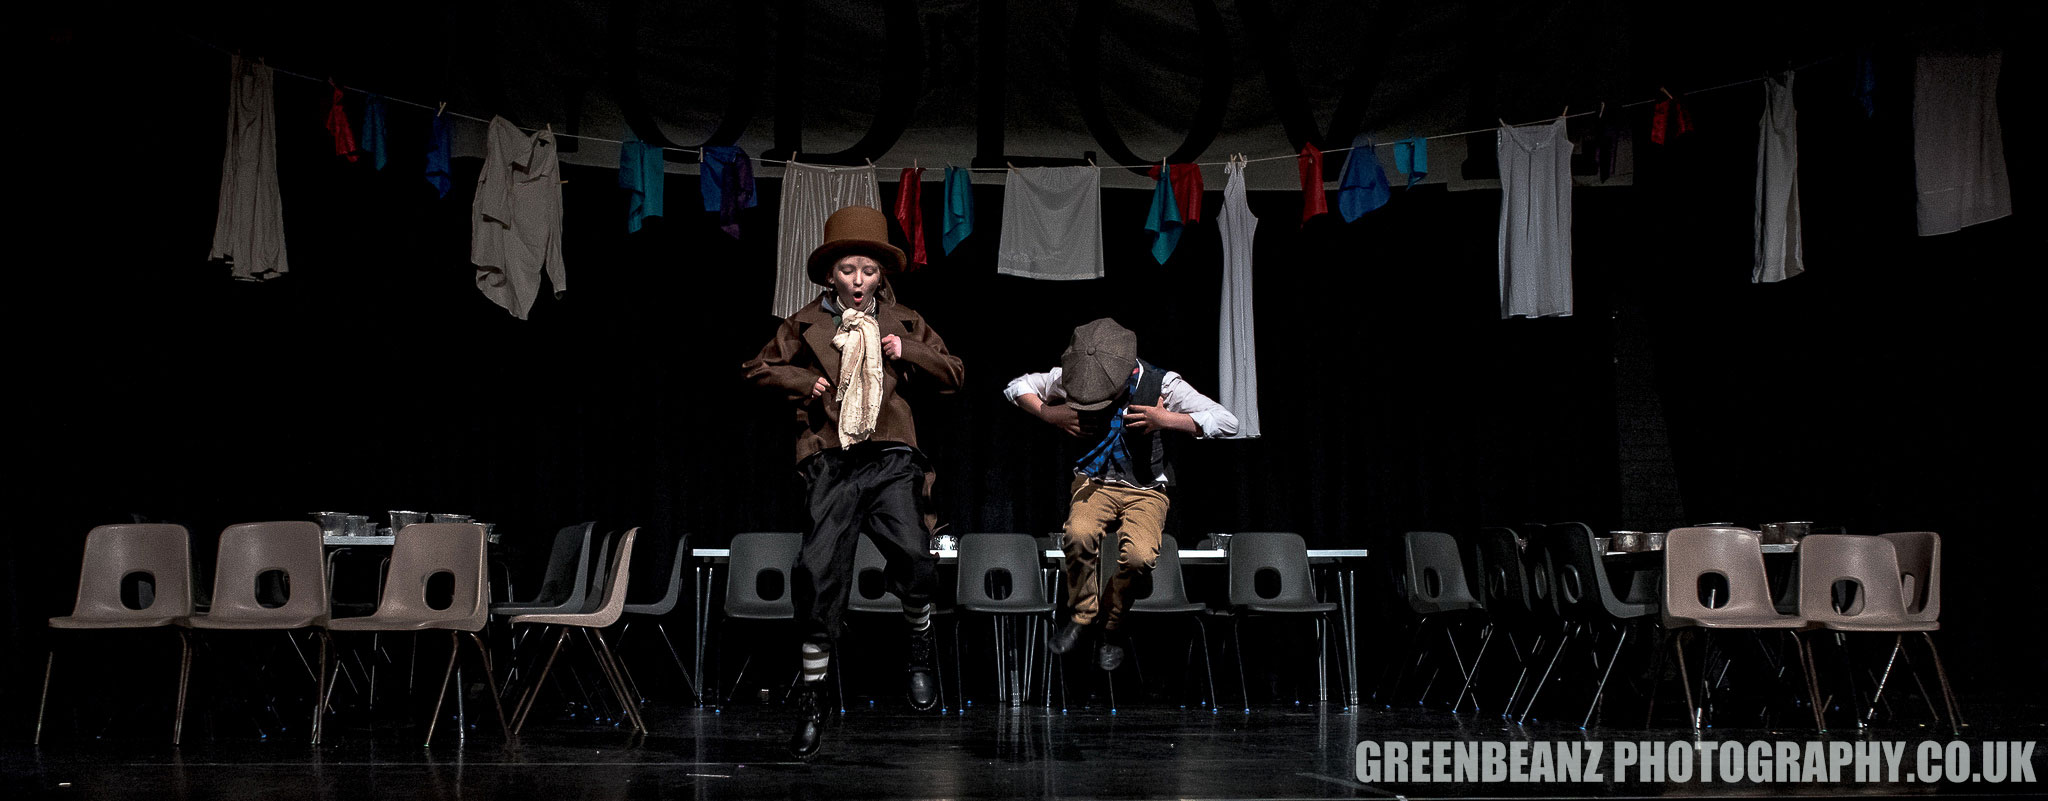 Oliver and the Artful Dodger in LS DRAMA Workshops version of the musical